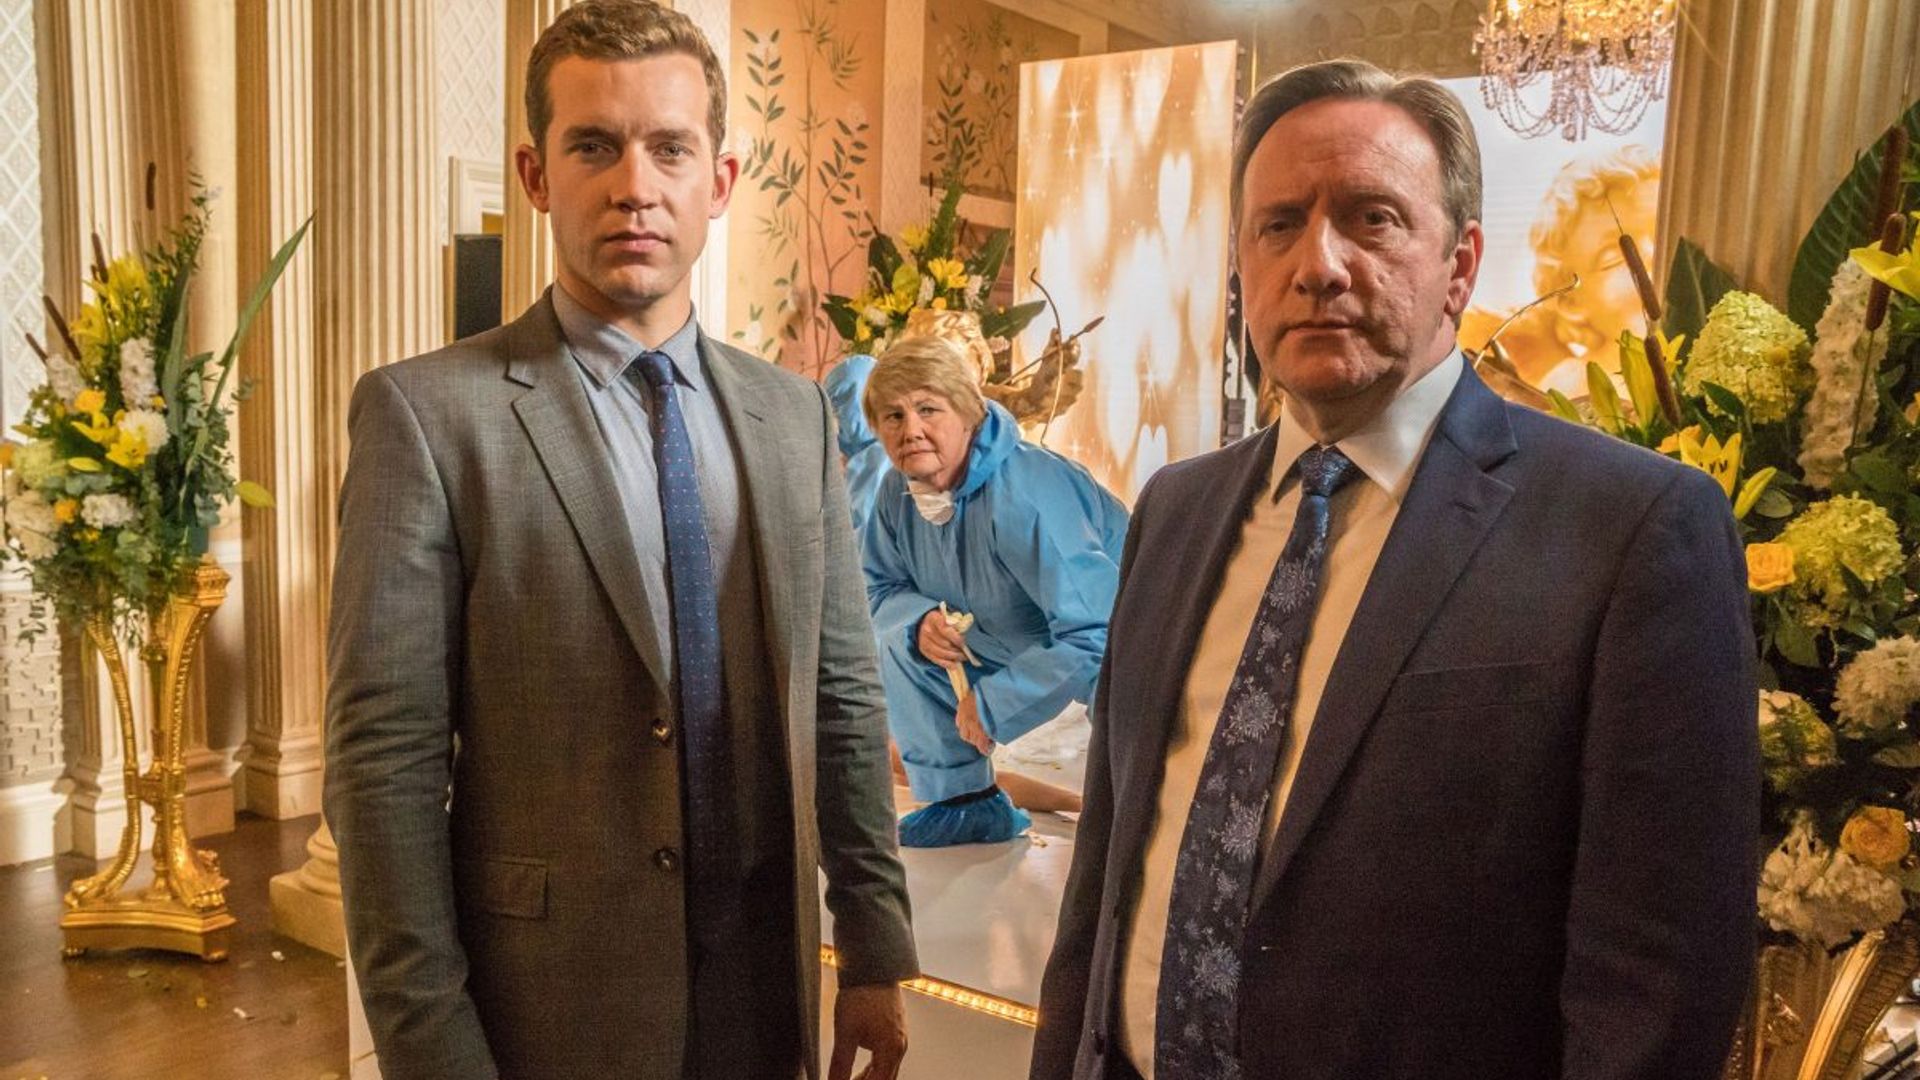 The complete guide to midsomer murders including latest news, episode guide...